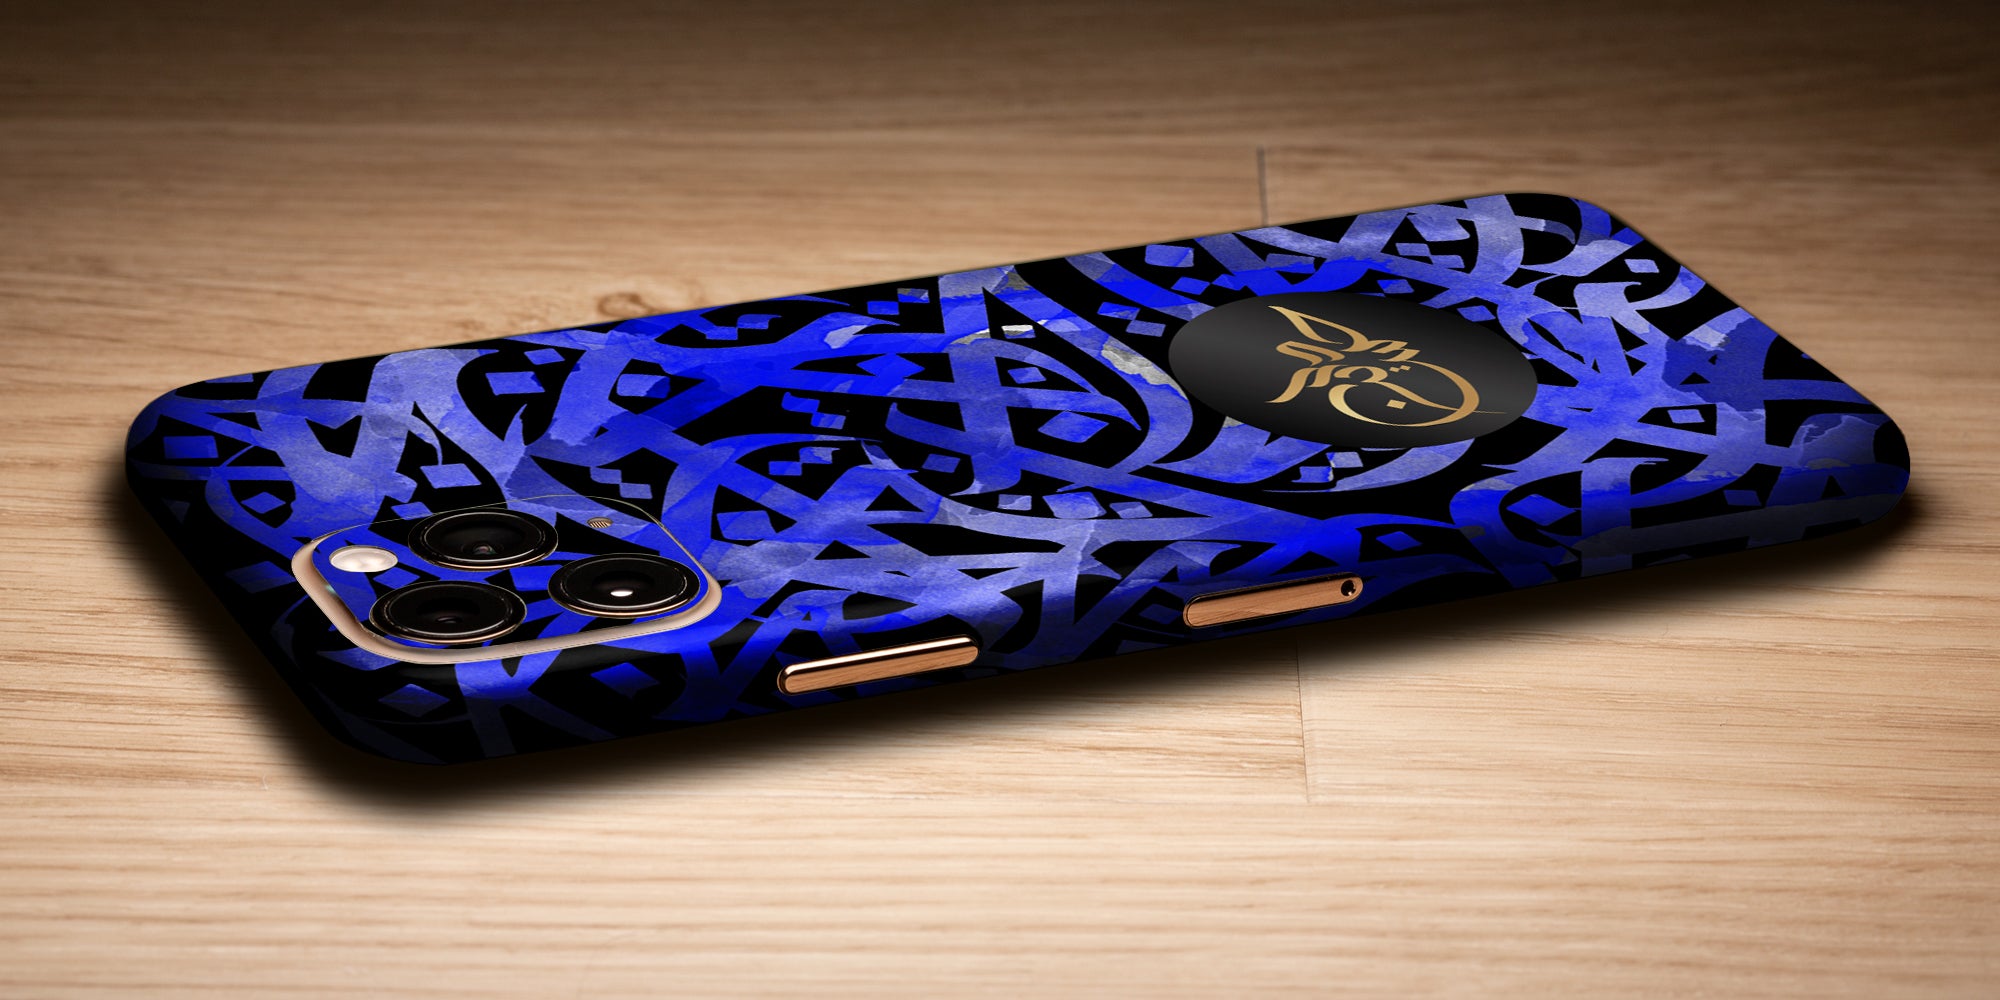 Arabic Calligraphy by Zaman Decal Skin With Personalised Name Phone Wrap - Blue Watercolour